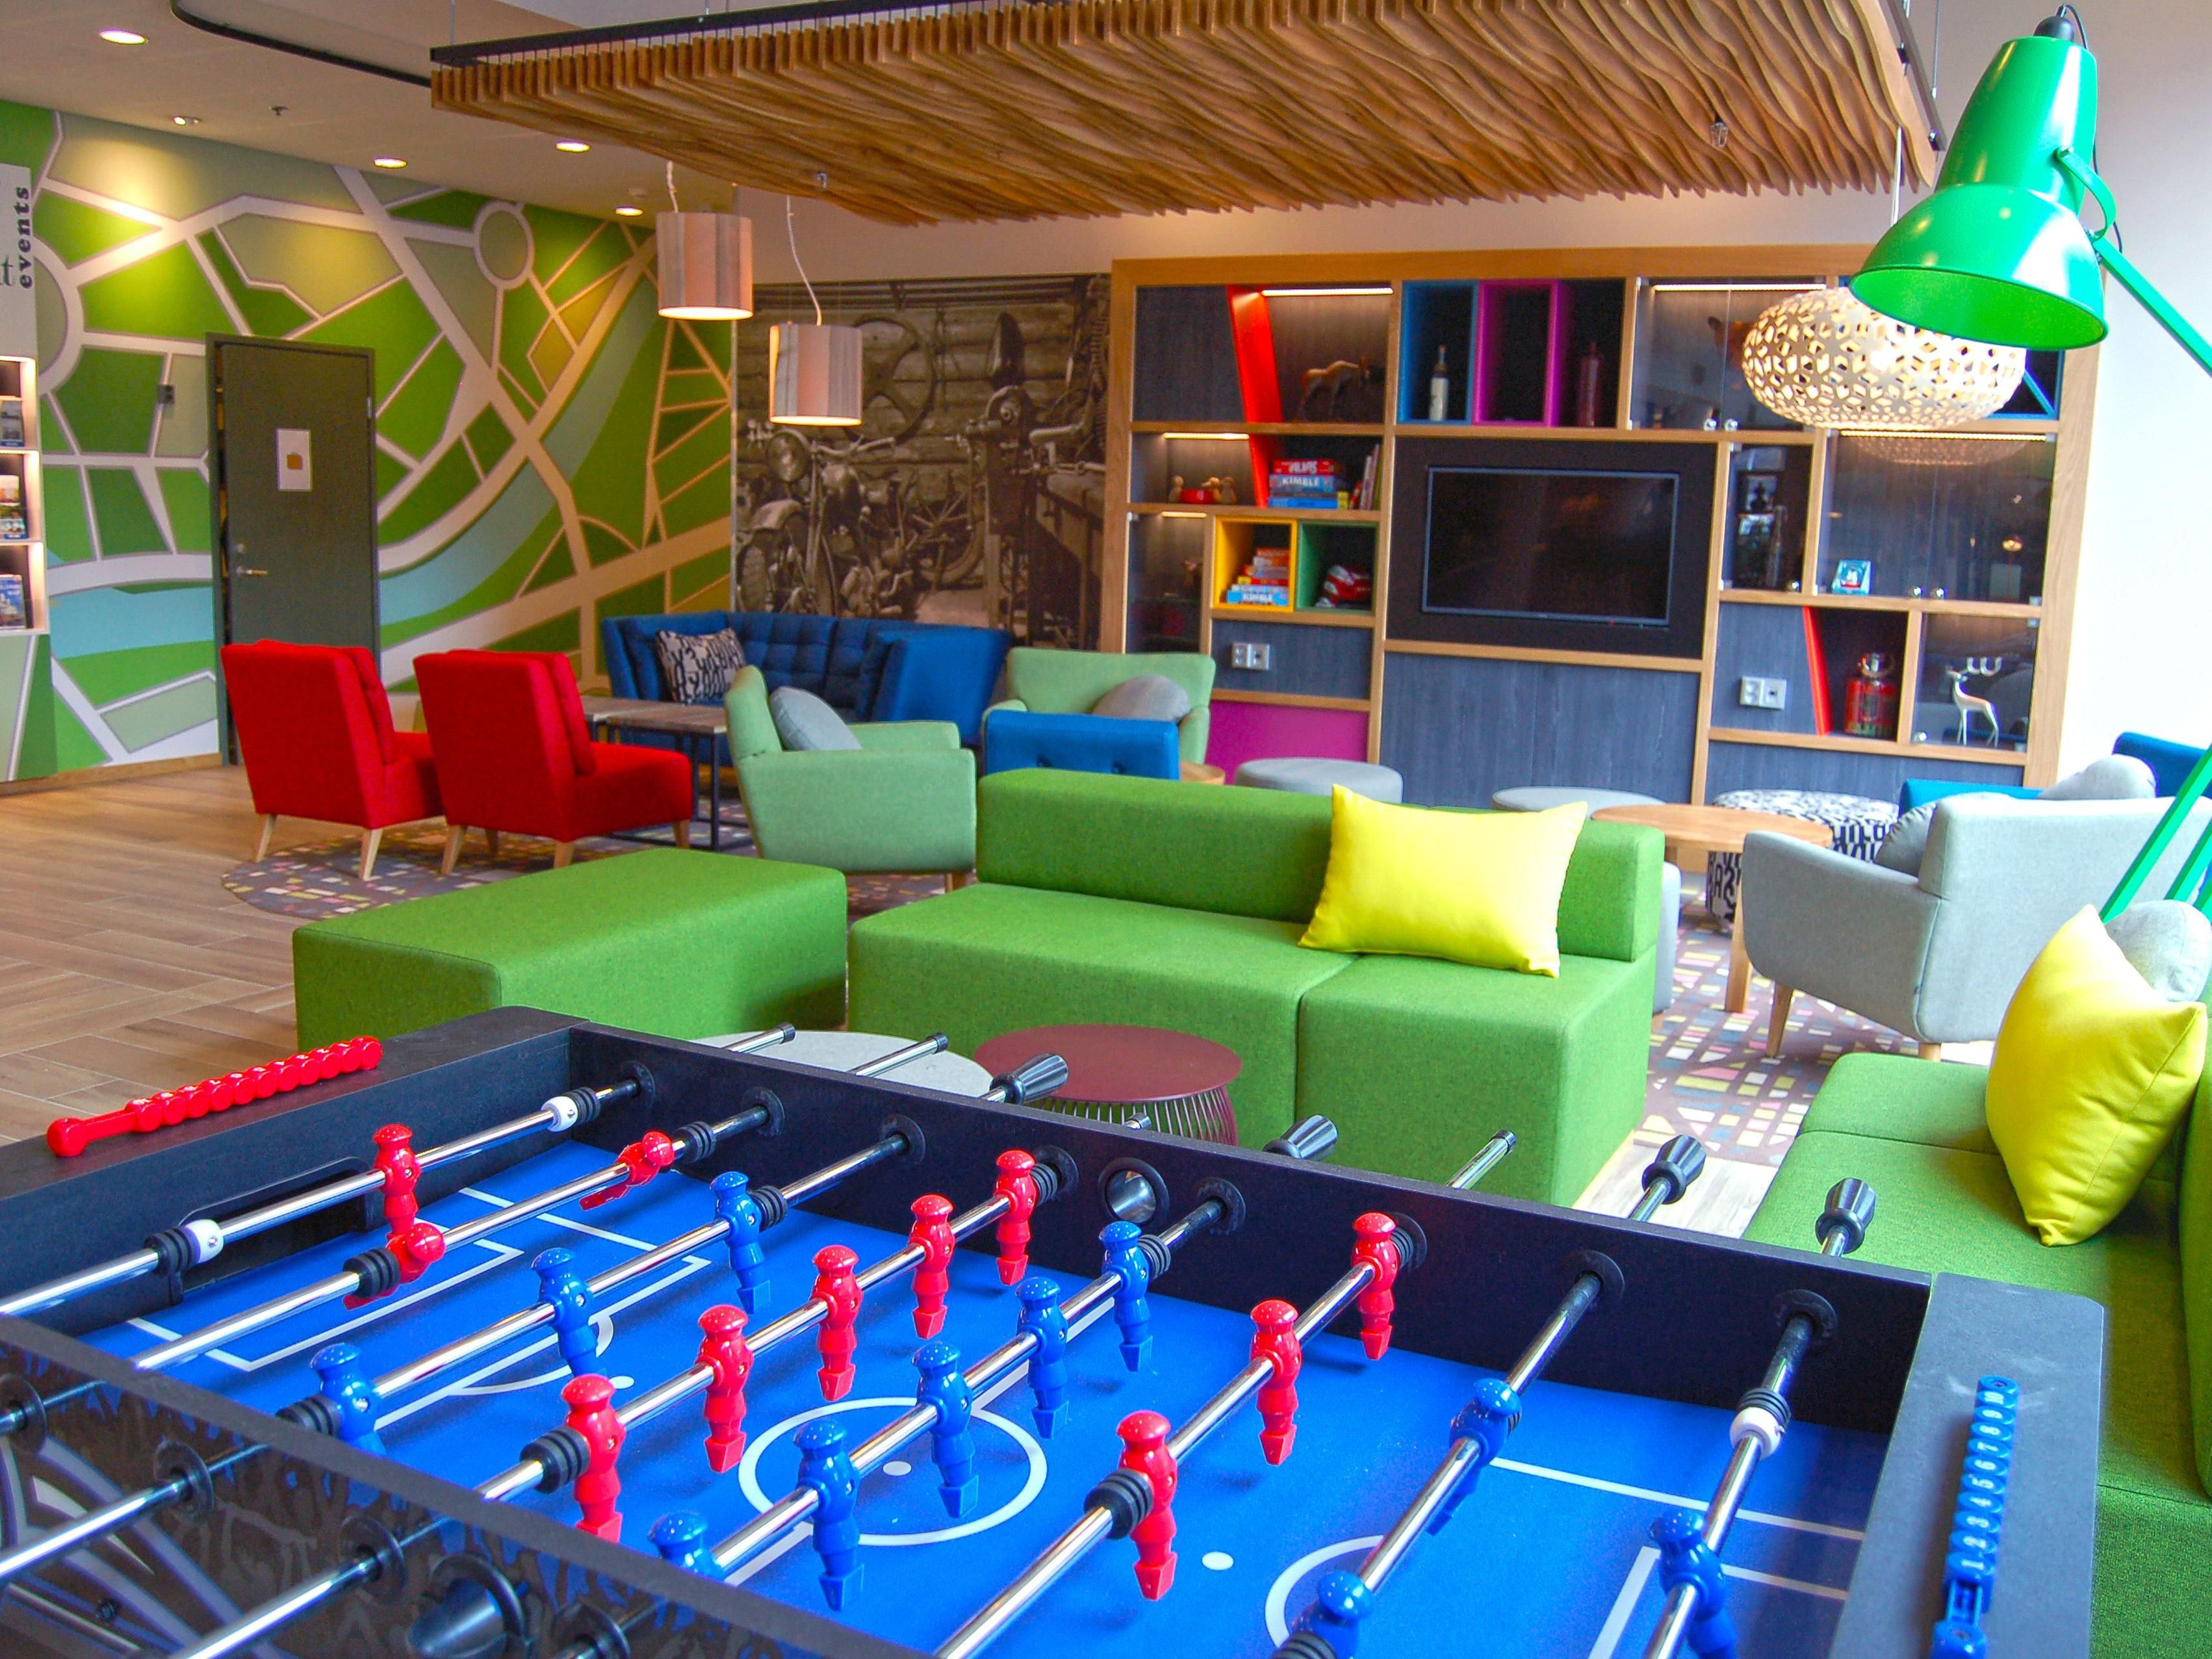 When guests want to have a bit of fun at the end of another busy day or just have a few minutes to wait before the taxi gets there, they can challenge a friend to a football game or grab a board game and chill out and connect with fellow travelers, family or friends.